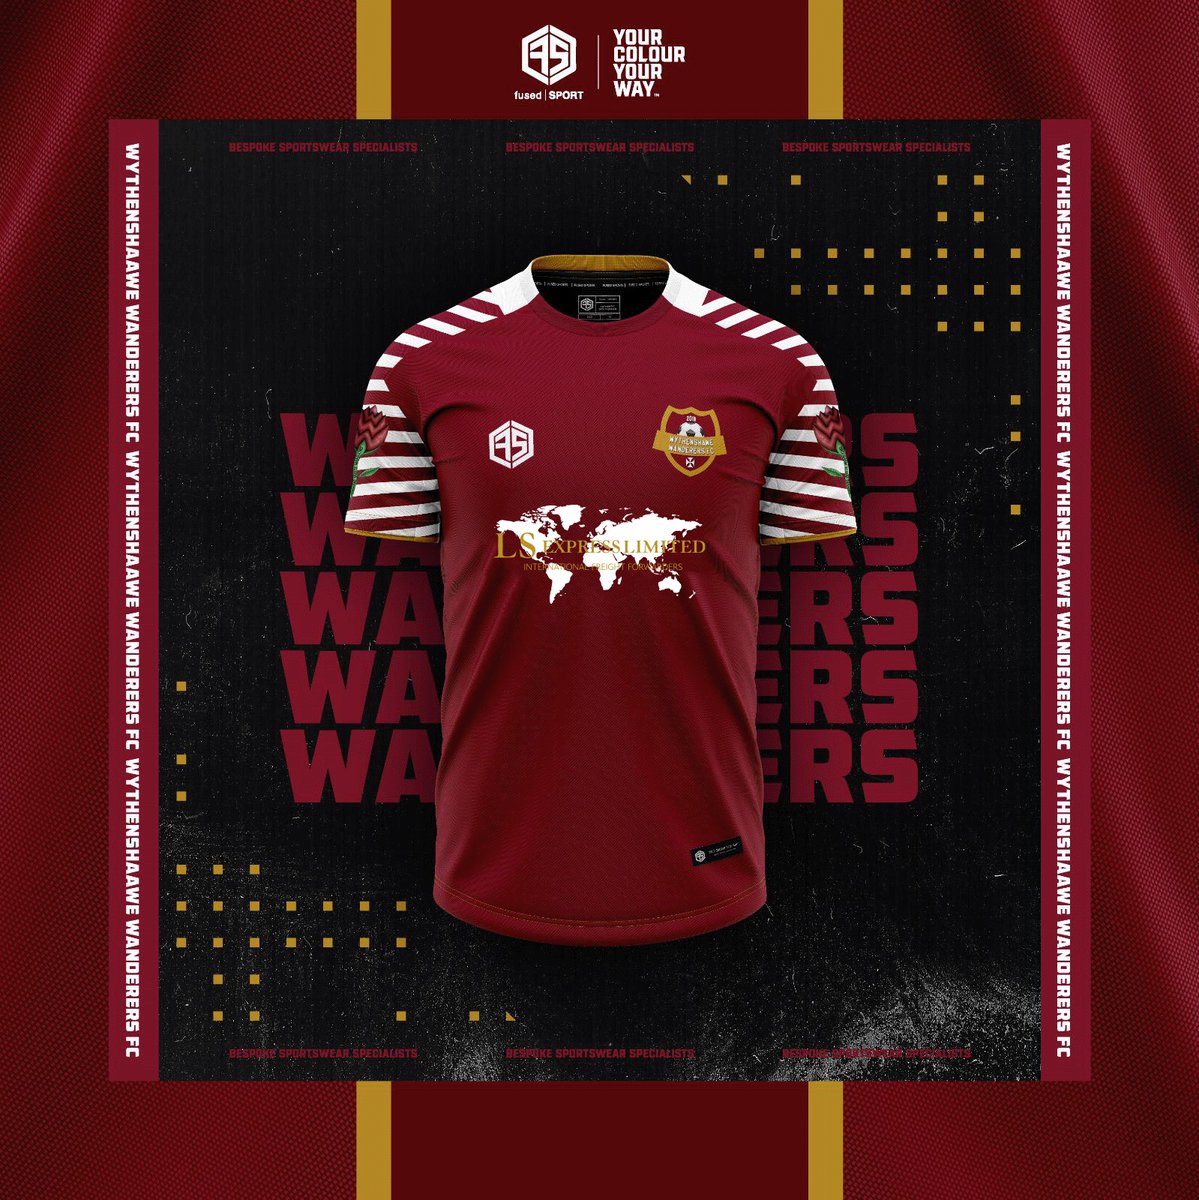 Delighted to announce @LSExpress23 have become club sponsors! 💫 Cannot thank you enough! ❤ Here's to a new partnership 🤝🙌 The new kits will be on order shortly designed by @fusedSPORTMCR..... 👀 at our home kit for next season! 😍 #upthewanderers